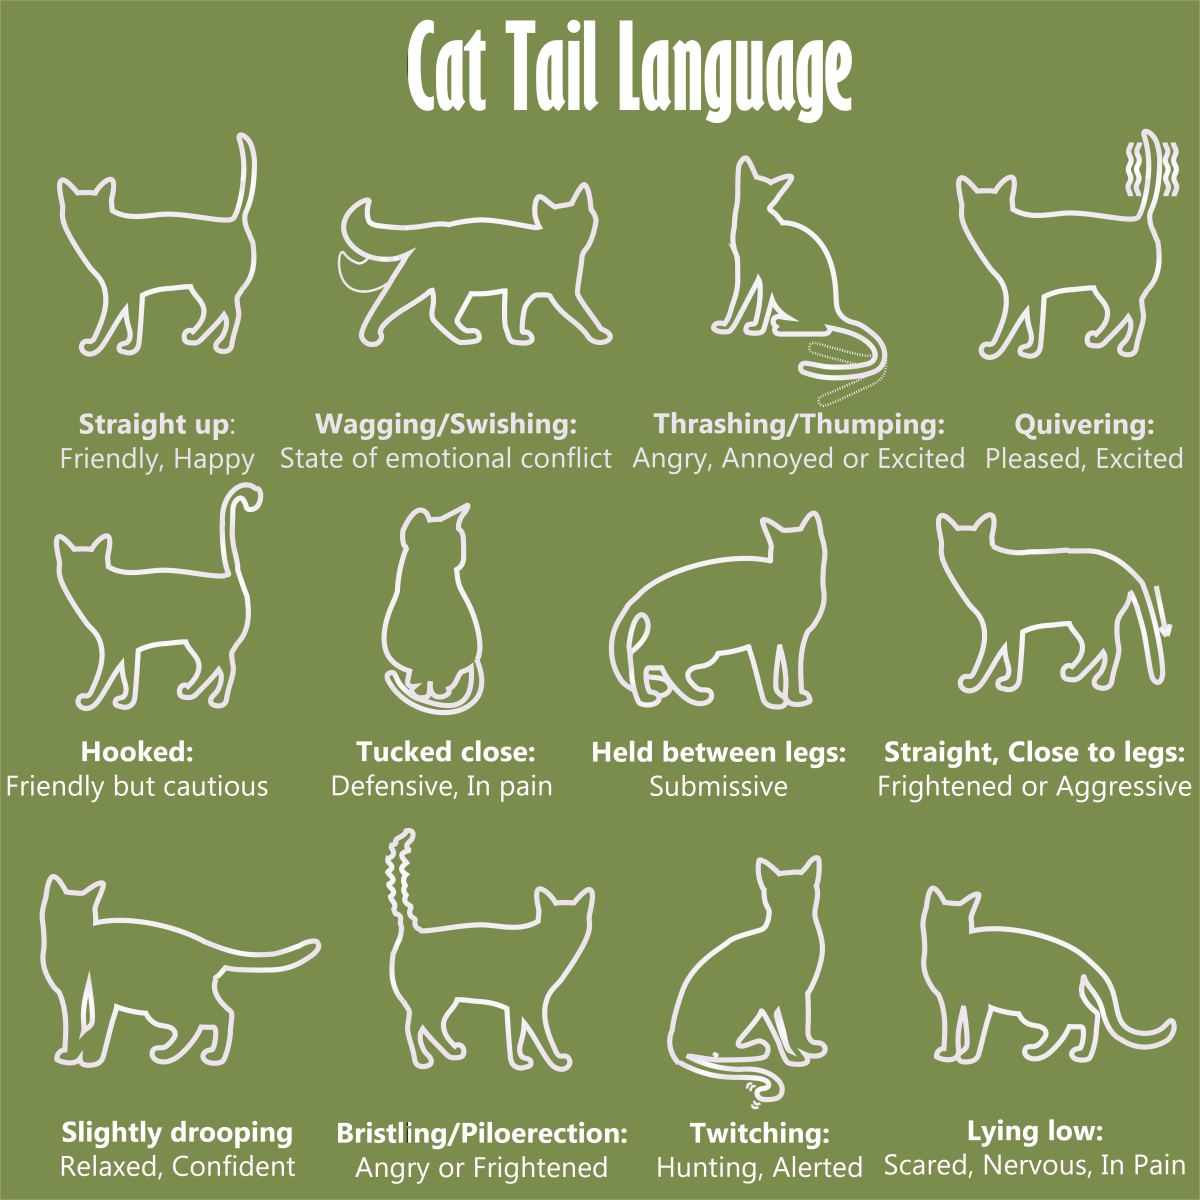 Image of cats showing different body expressions